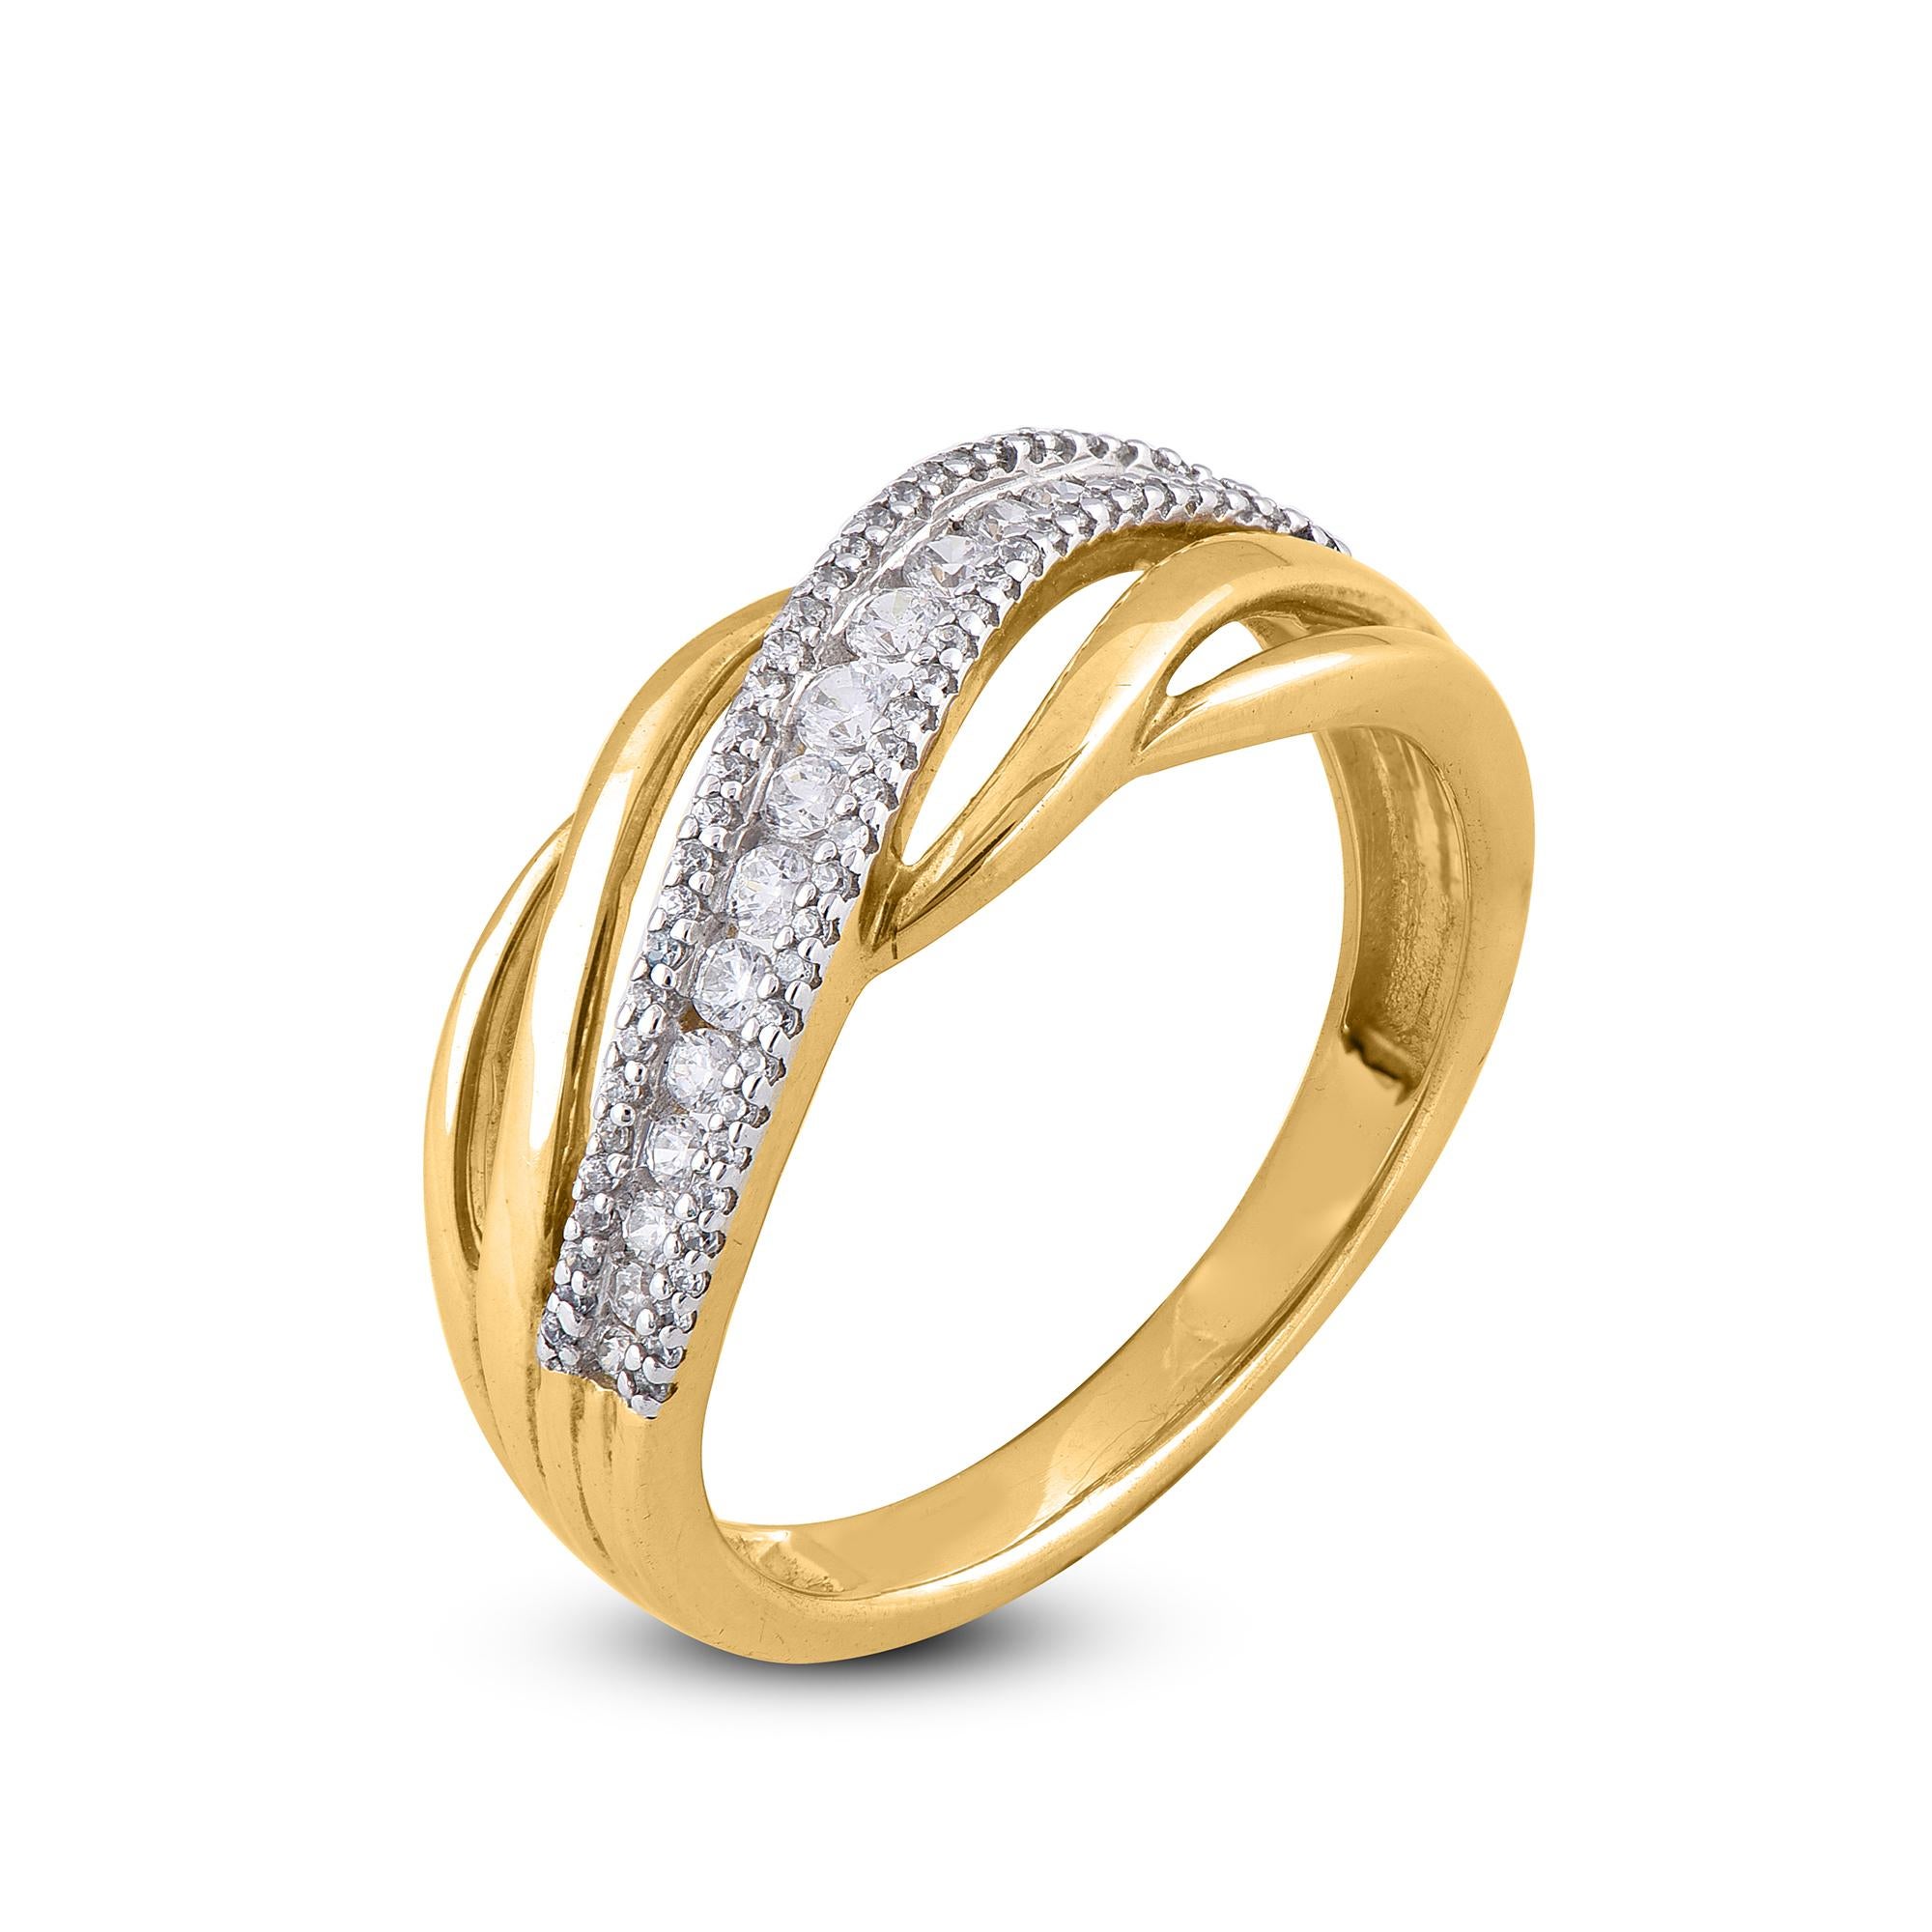 Honor the women you love with this wavy wedding band is expertly crafted in 14 Karat Yellow Gold and features 83 round diamond set in pressure and channel setting. This engagement ring has high polish finish and is a valuable addition to any jewelry